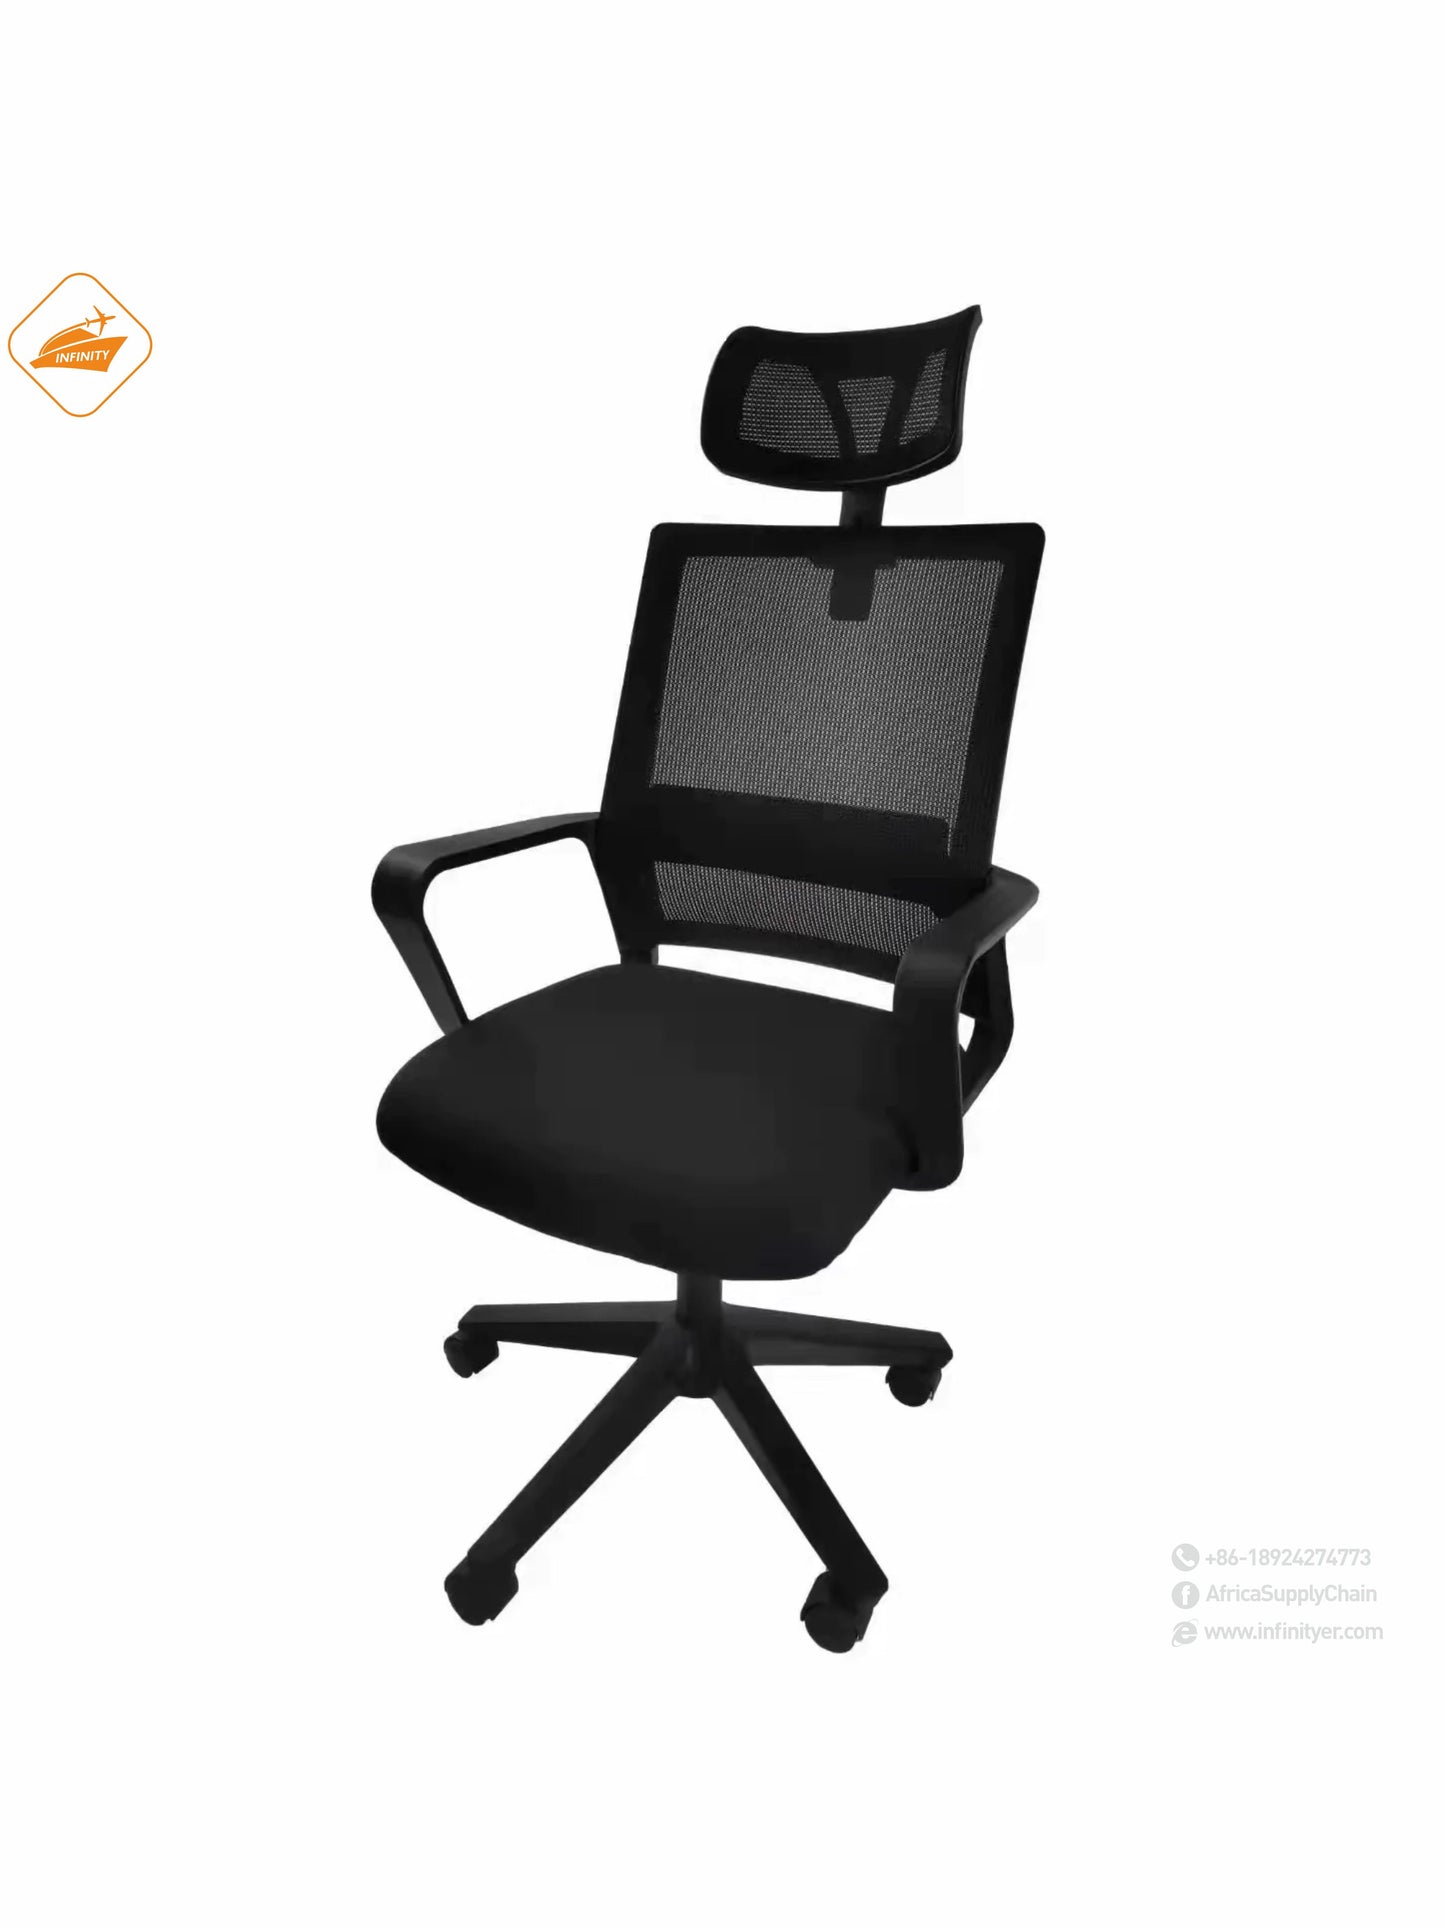 Mesh office chair with wheels